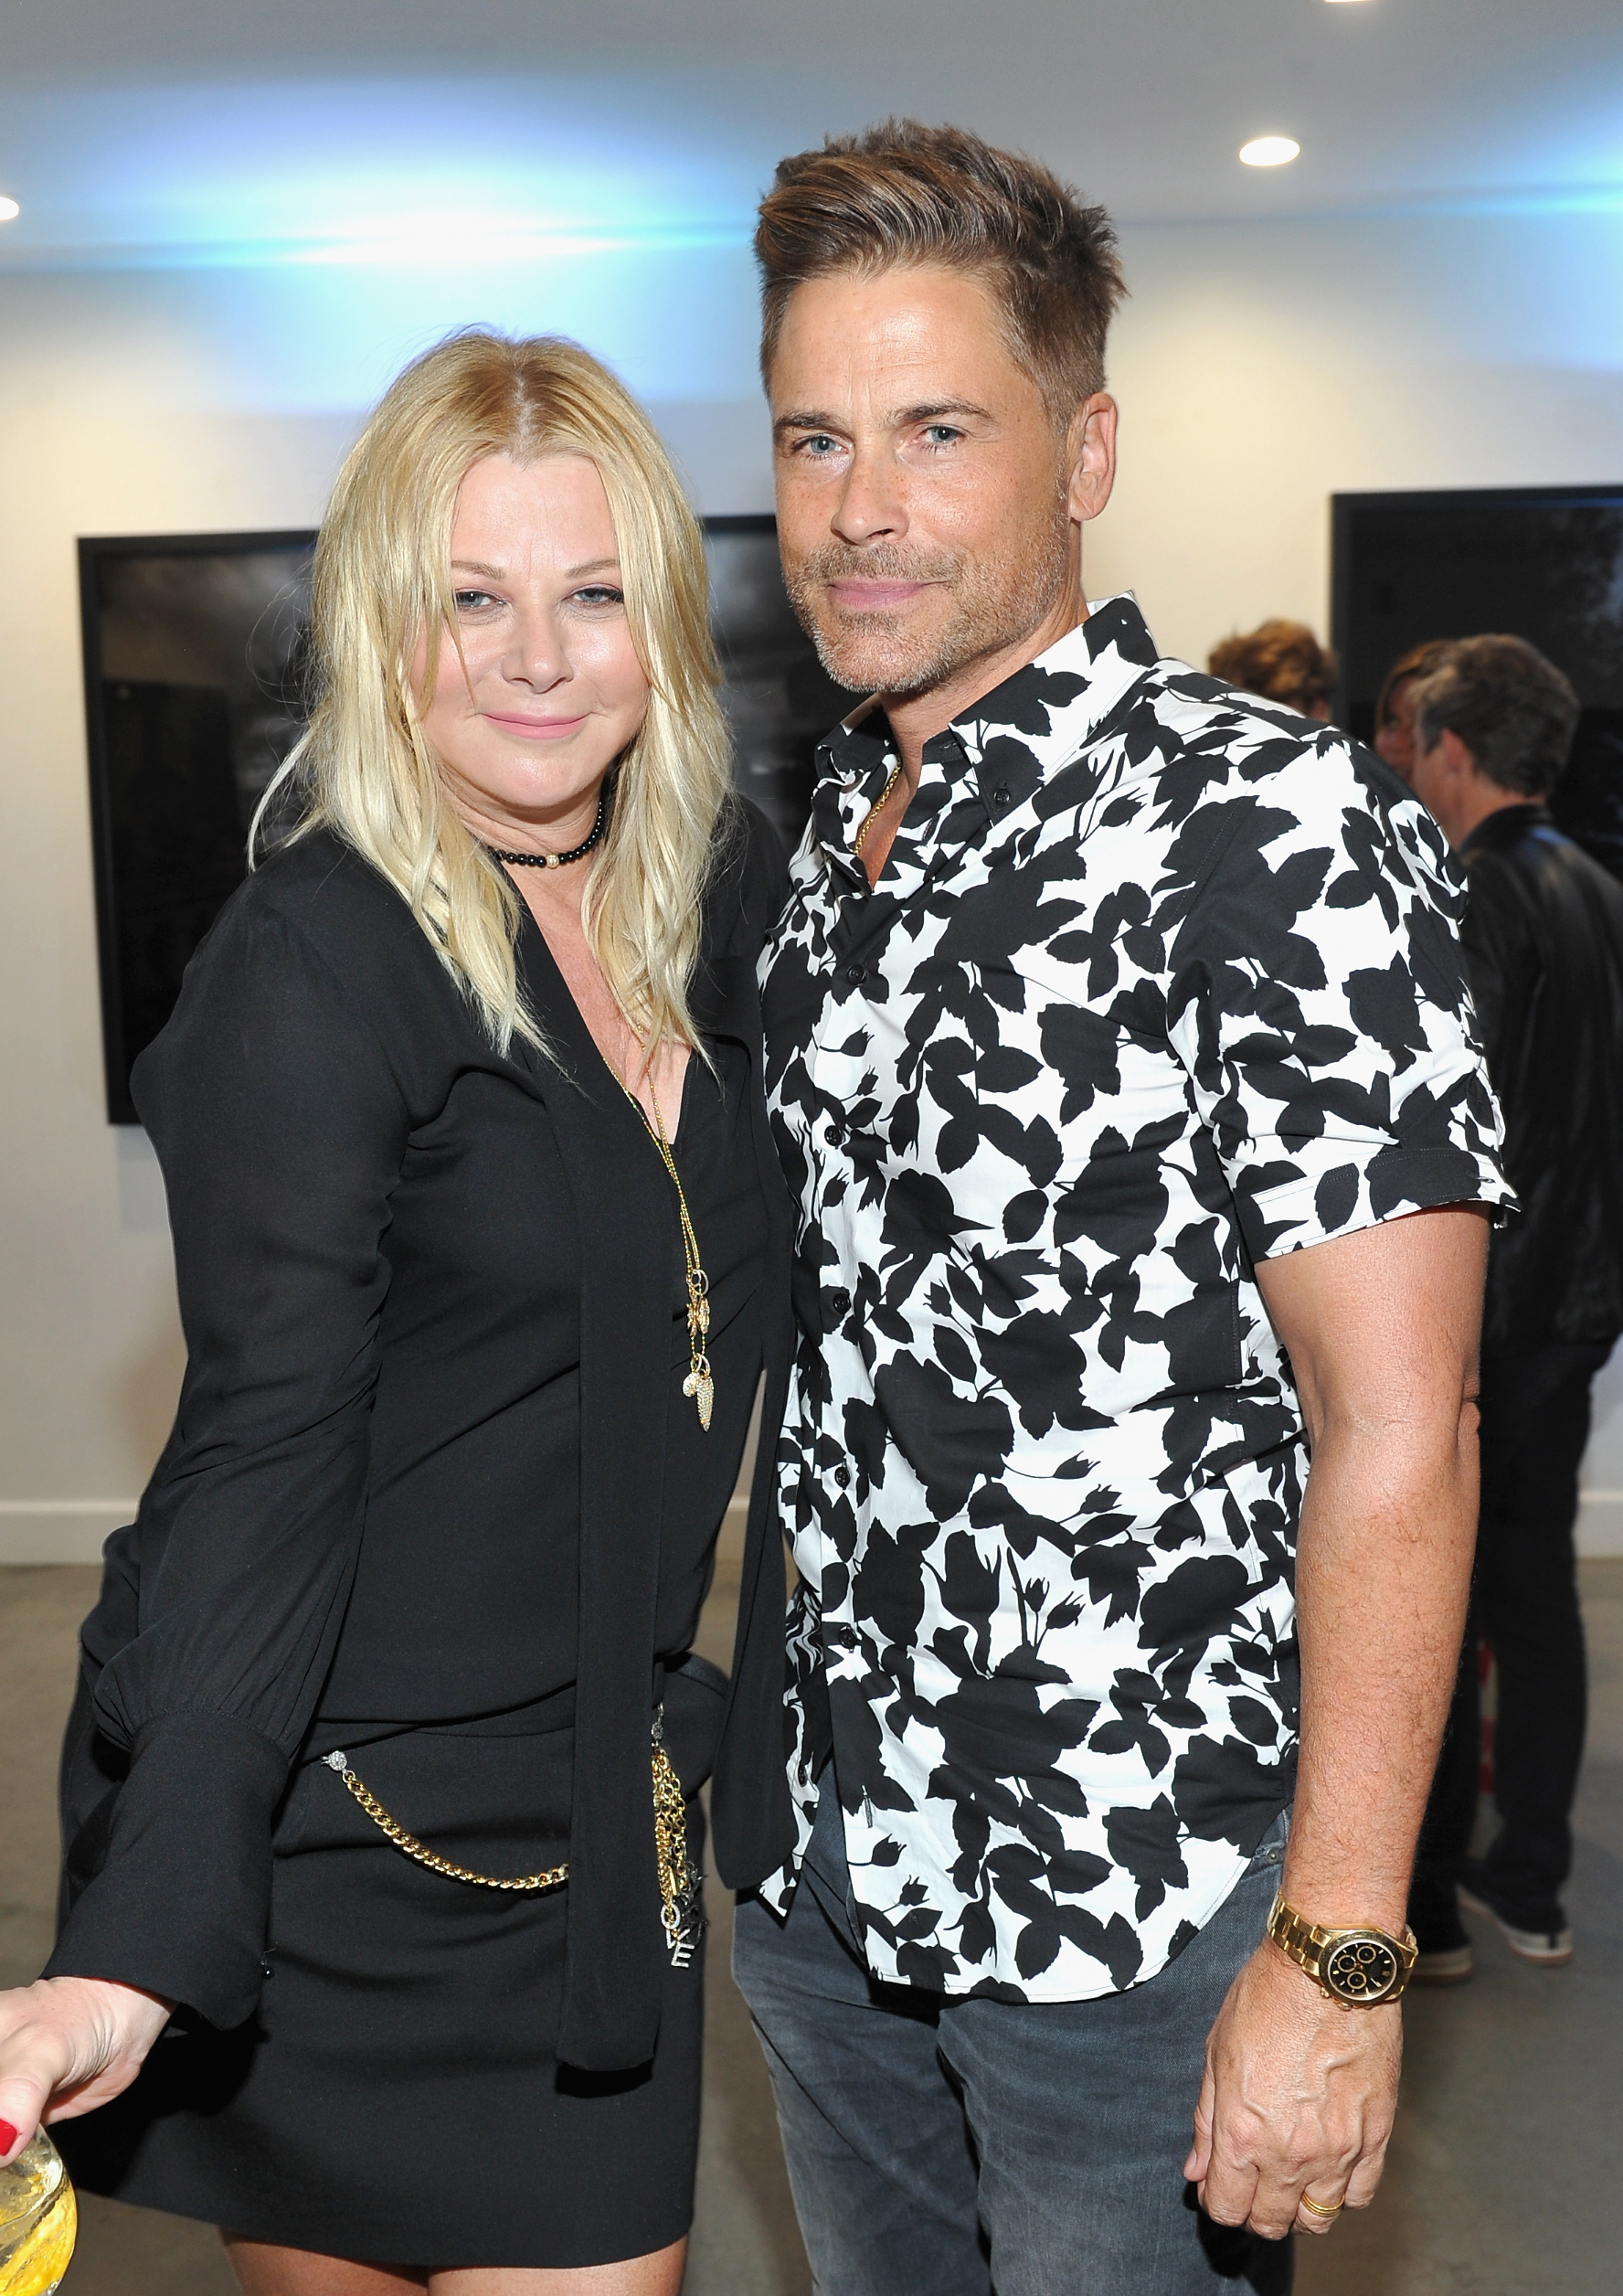 Sheryl Berkoff and Rob Lowe at the private opening of Sascha von Bismarck's debut photography collection, "Perfume" at Eric Buterbaugh Gallery on September 6, 2017 in Los Angeles, California | Source: Getty Images